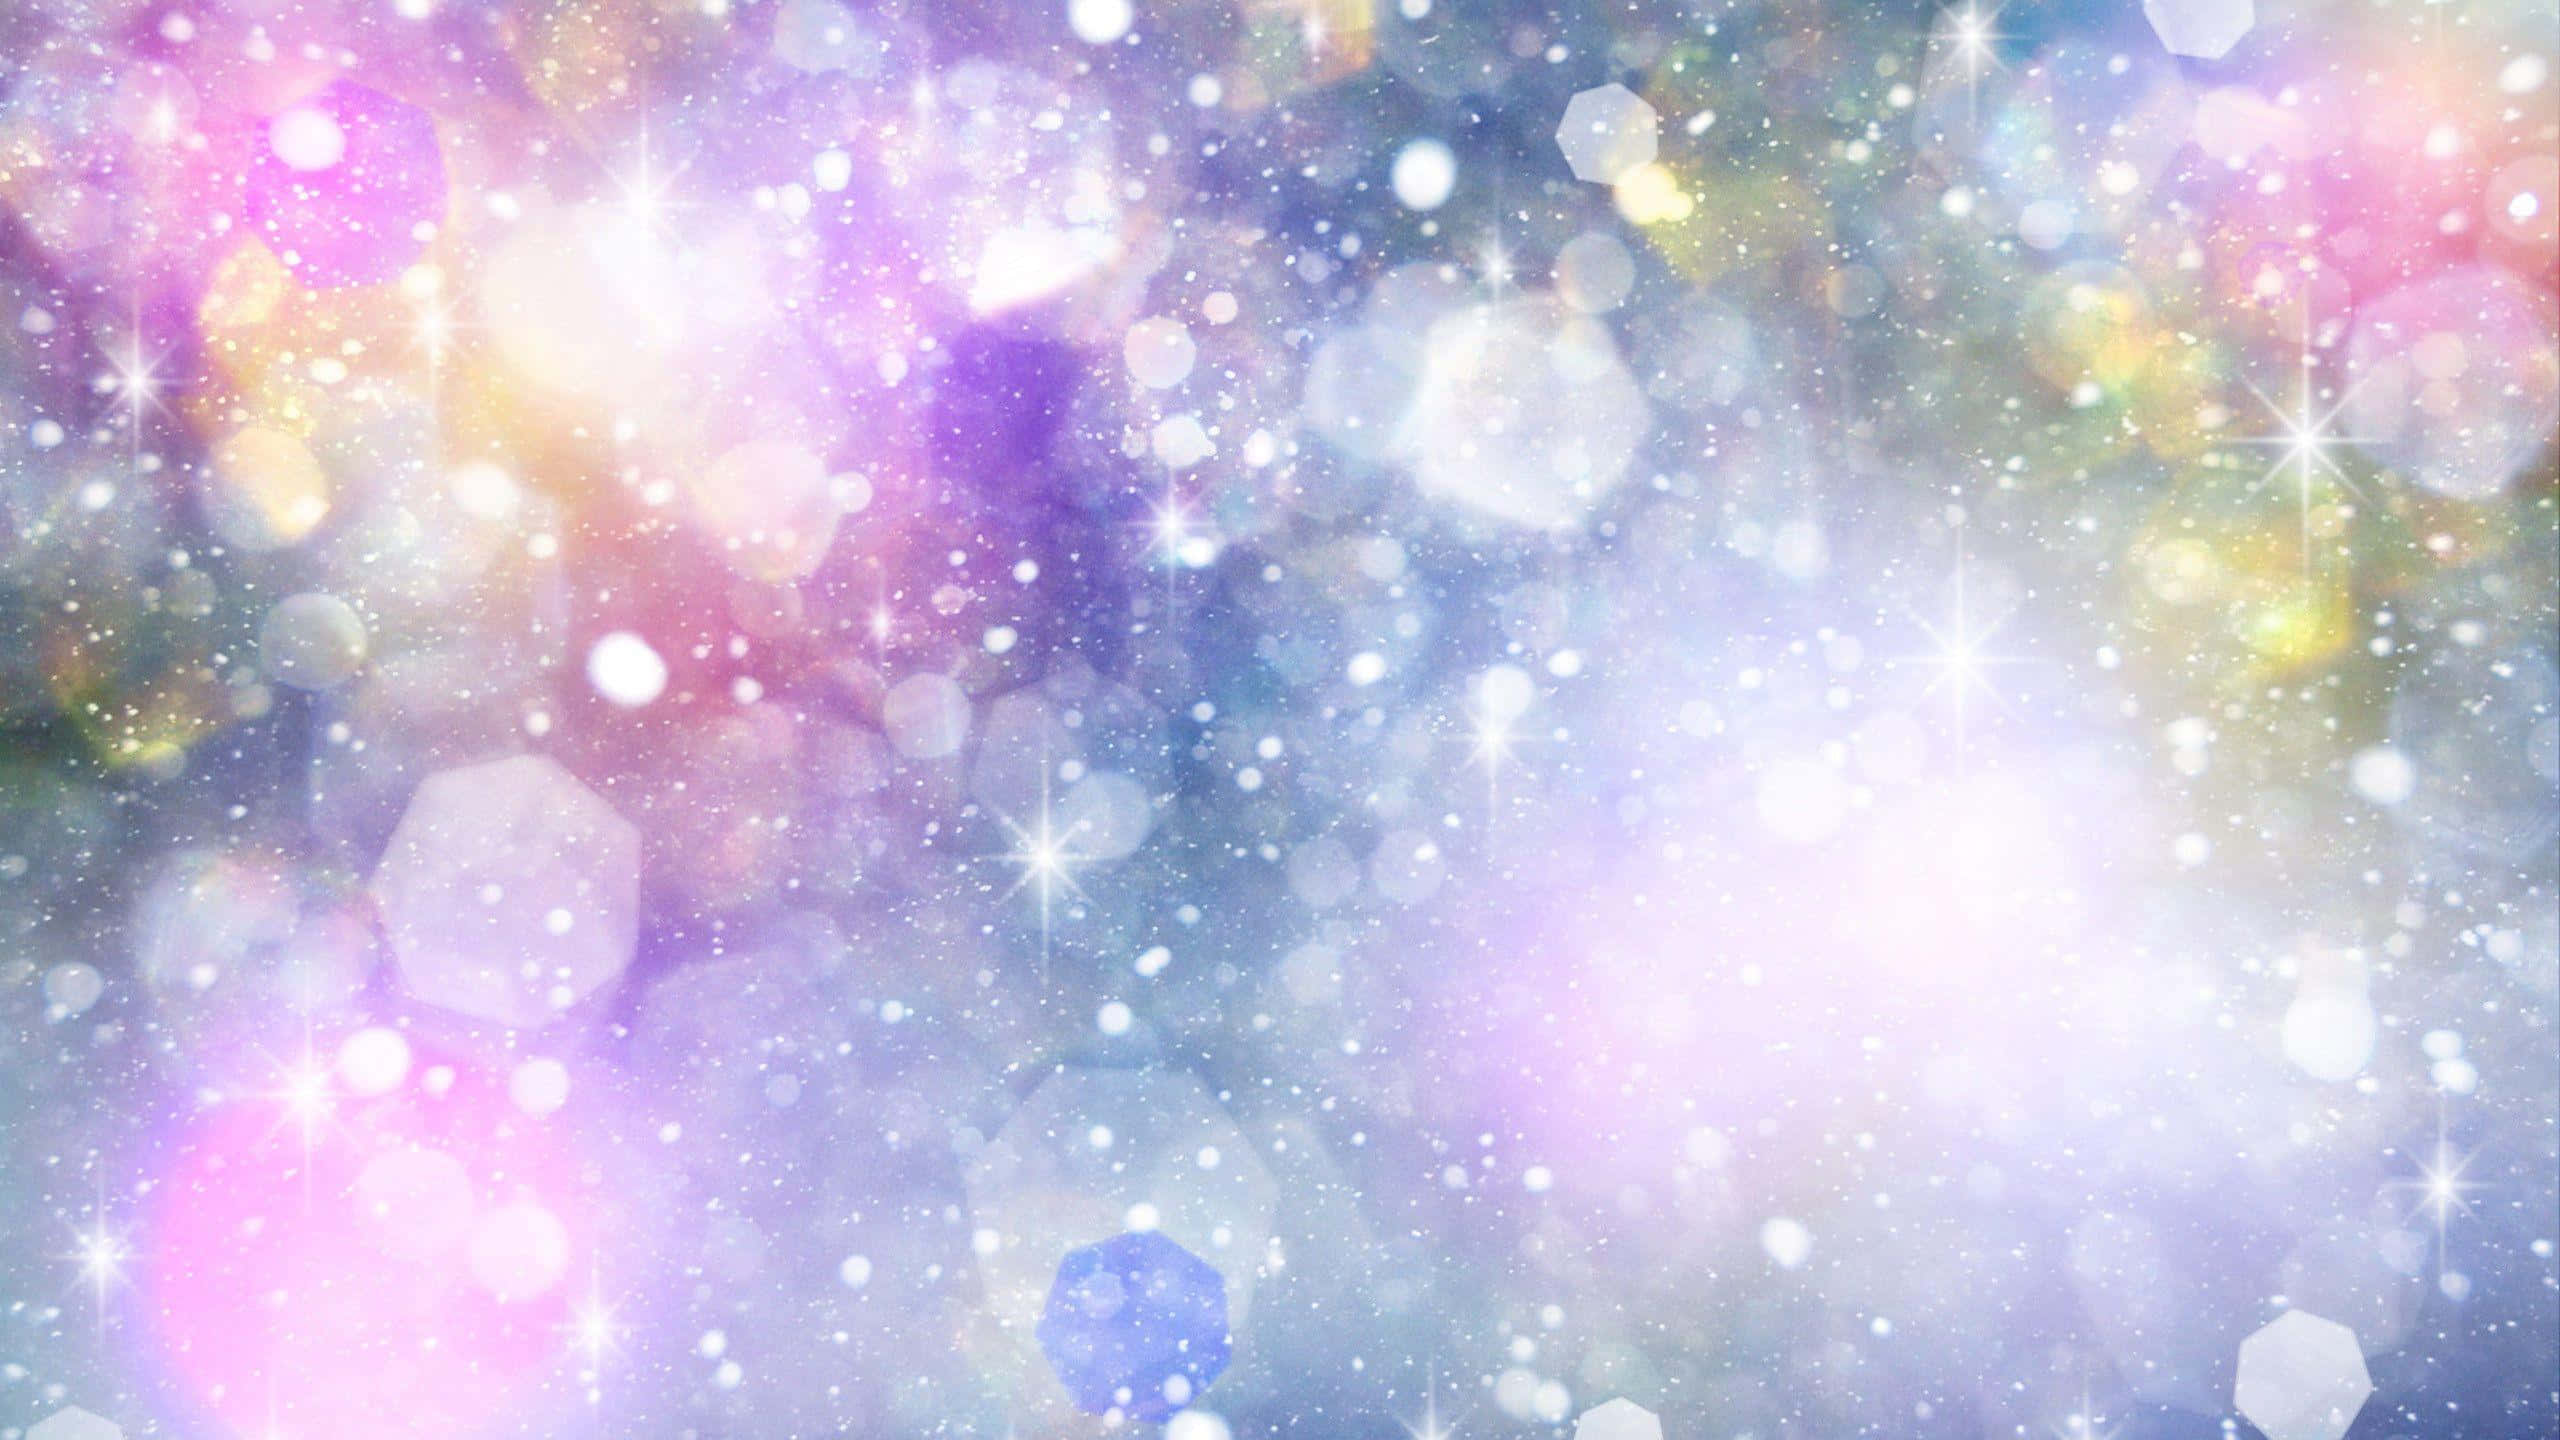 Add some sparkle to your screen with this beautiful and shiny wallpaper.